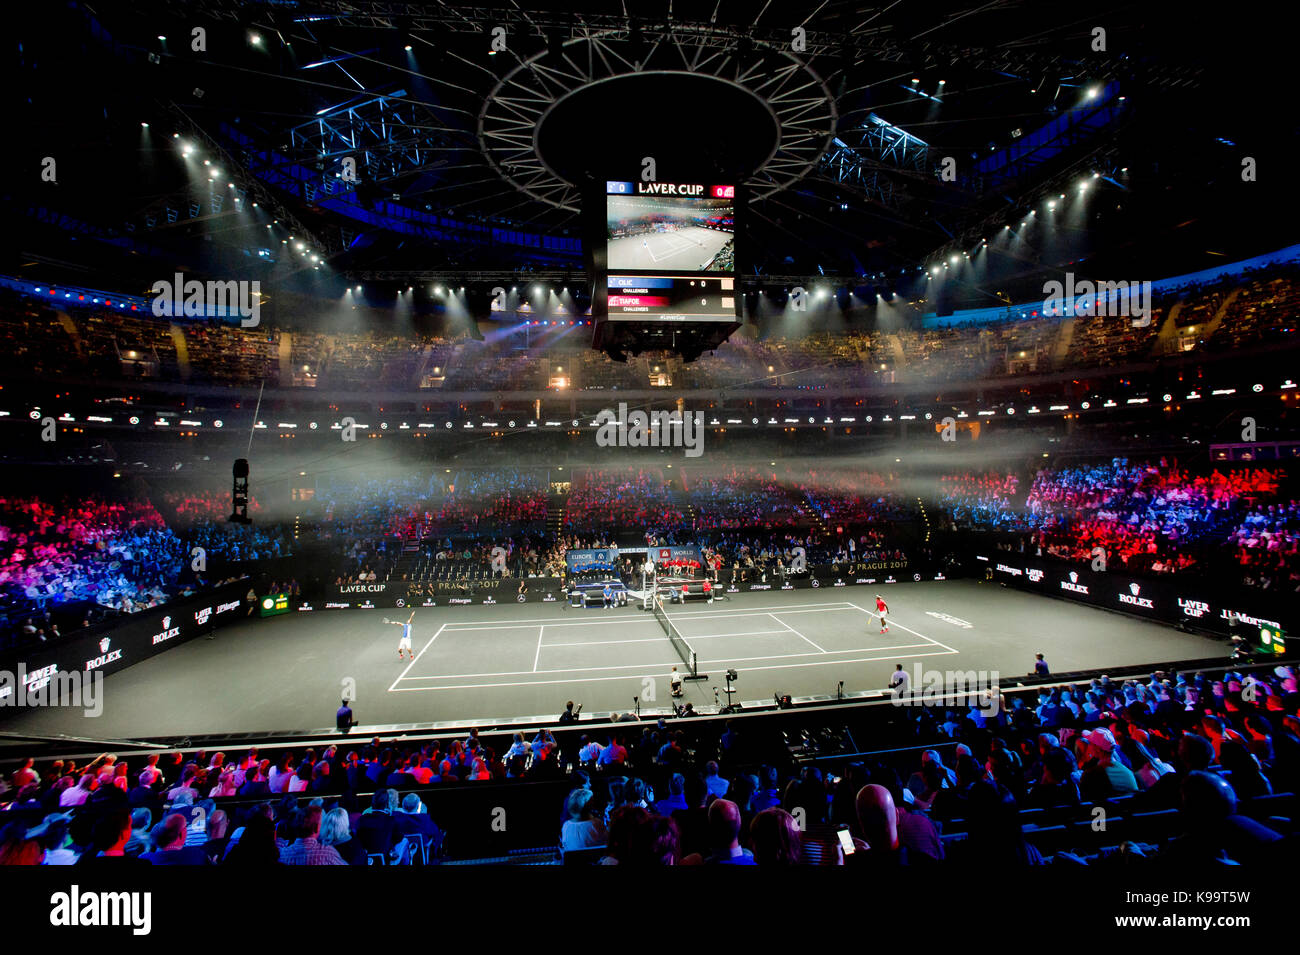 O2 arena with dark tennis court is seen during the first edition of the  Laver Cup tennis tournament in Prague, Czech Republic, on September 22,  2017. The team of Europe will compete